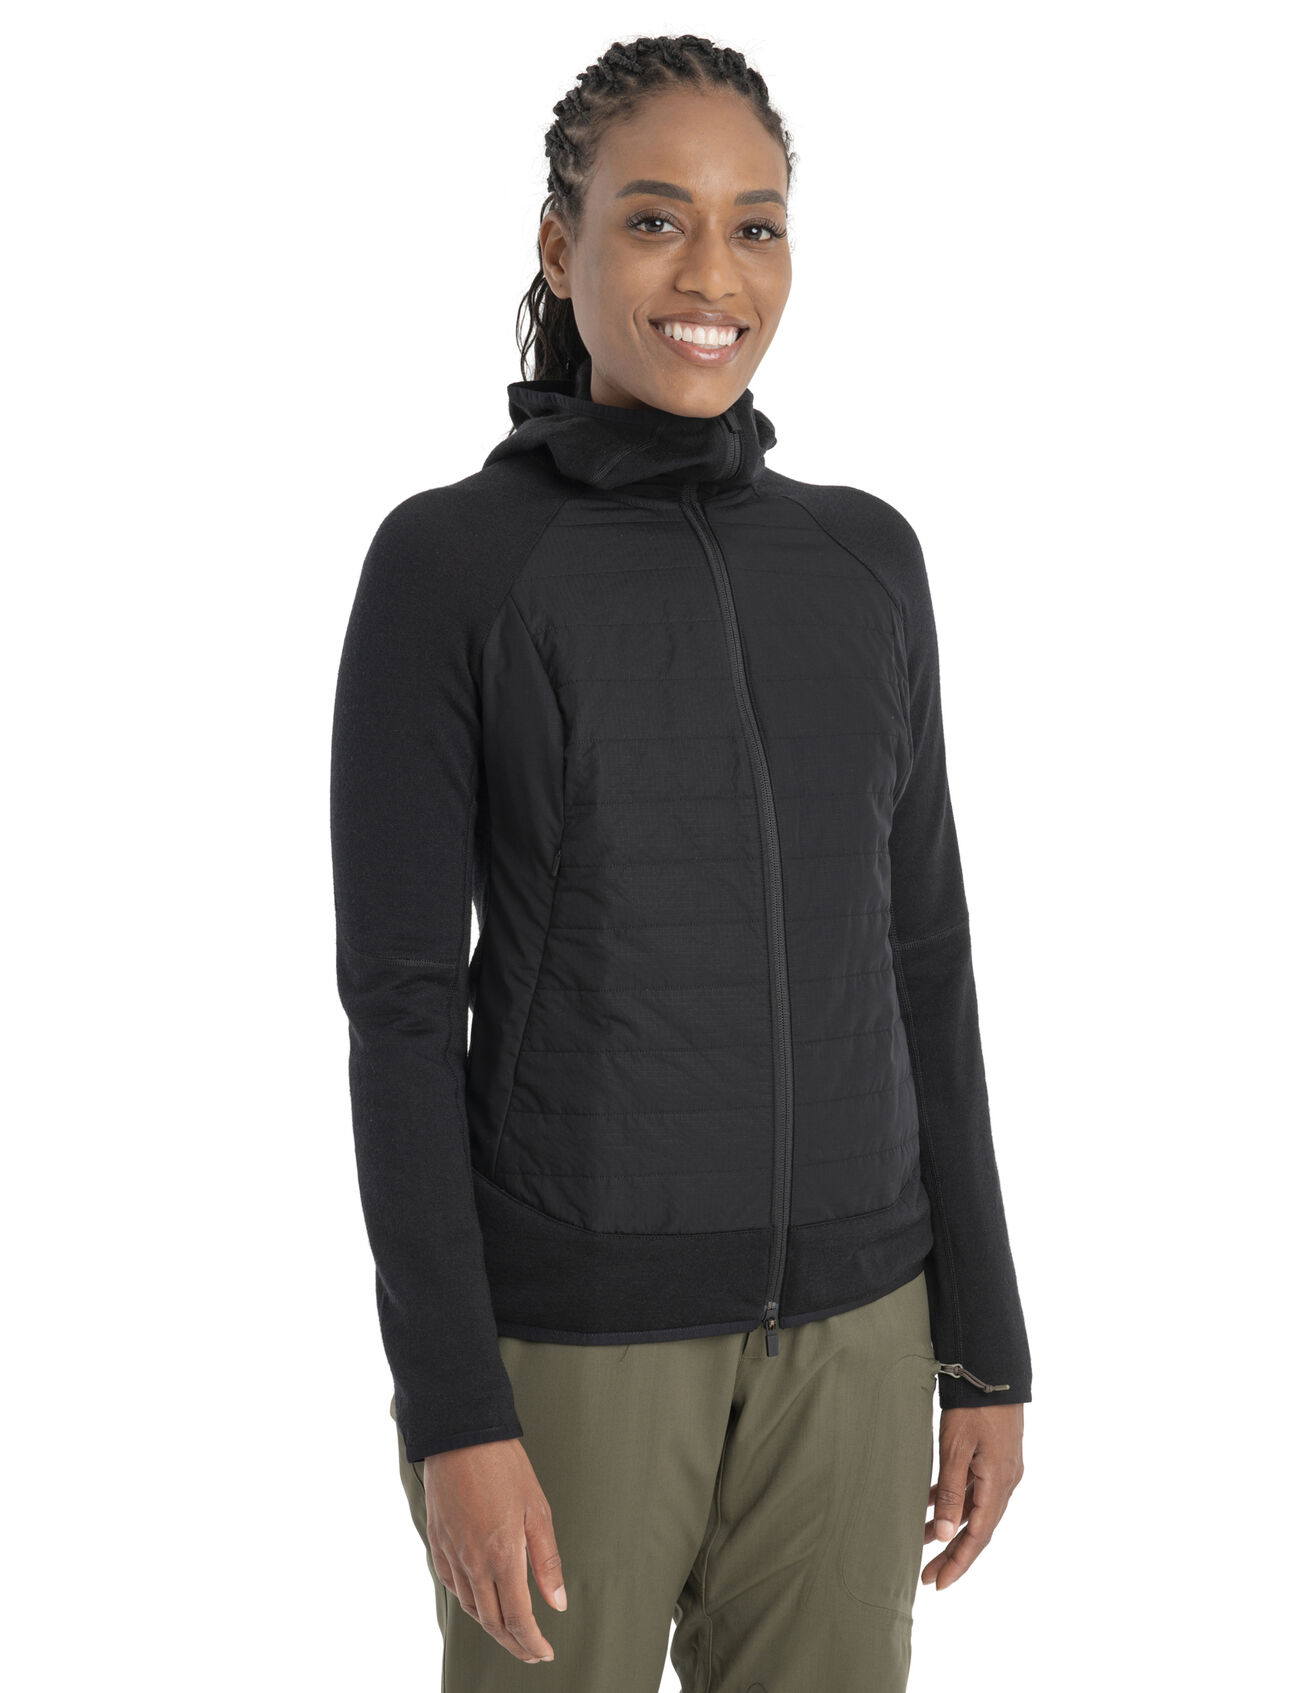 Womens Merino Blend Quantum Hybrid Long Sleeve Zip Hoodie Taking our favourite merino midlayer to the next level with the addition of plant-based Lyoloft insulation, the Quantum Hybrid Long Sleeve Zip Hoodie is an alpine layering piece perfect for technical, cold-weather pursuits.